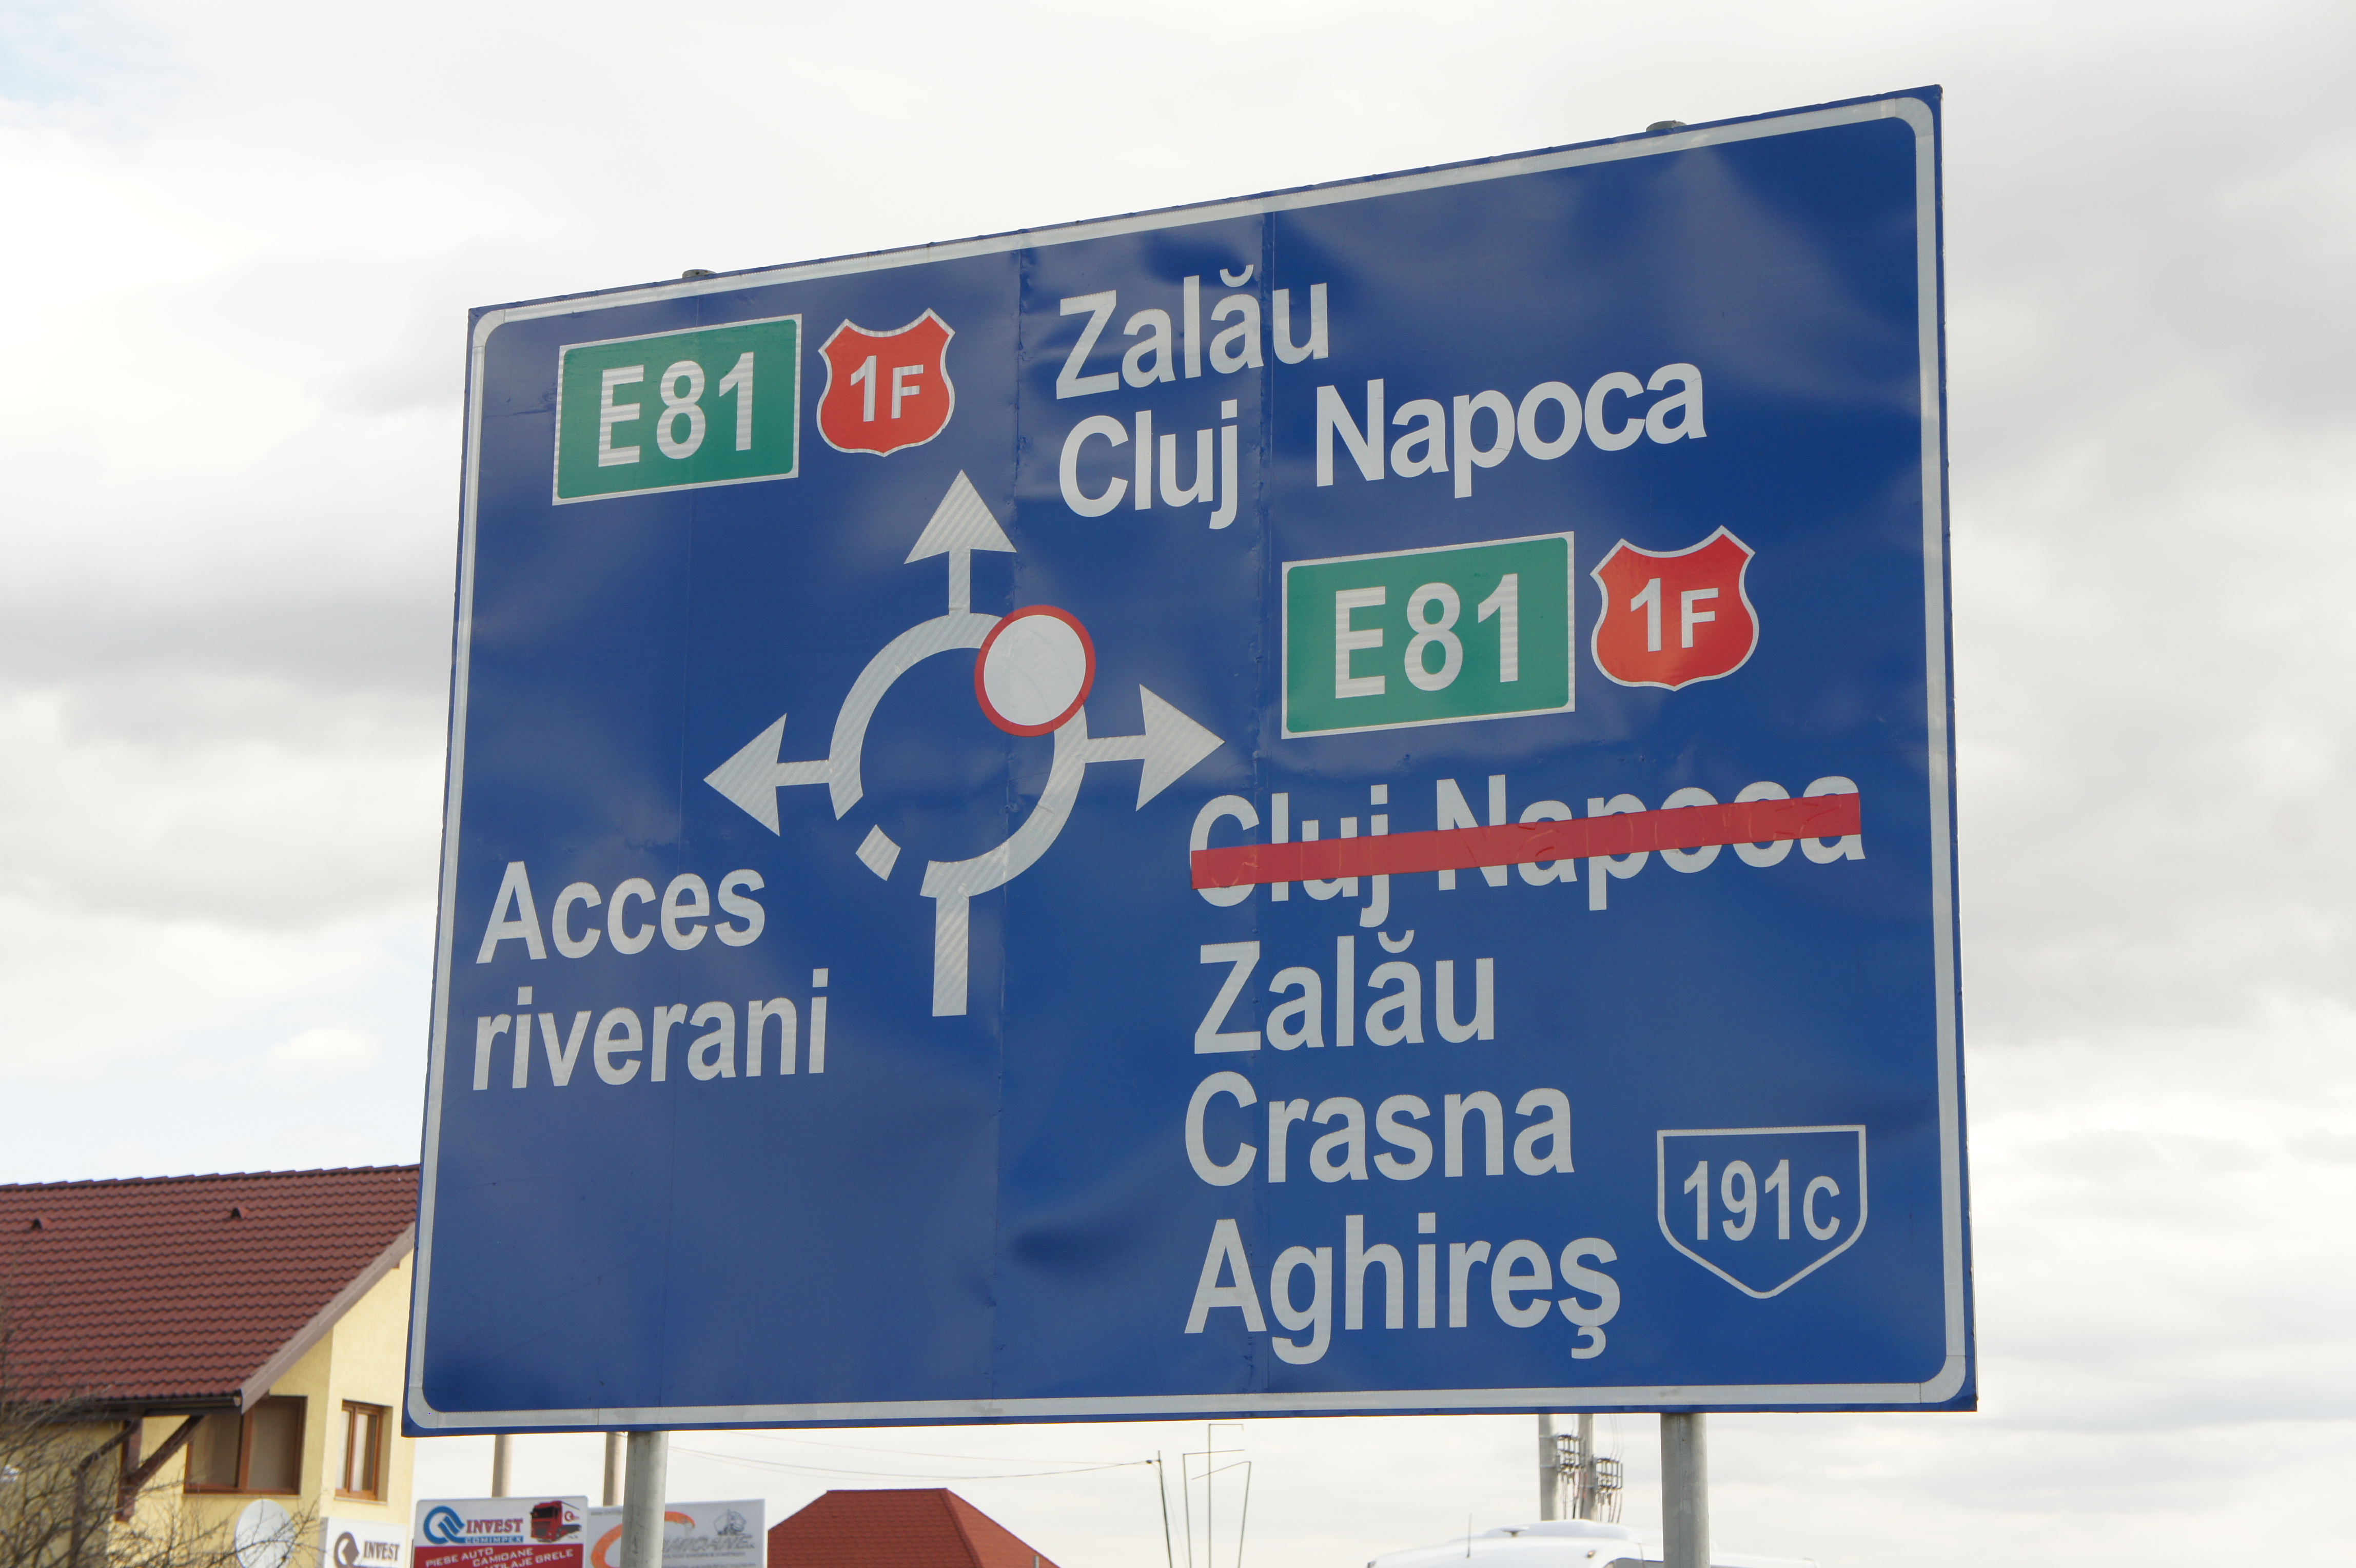 Go straight or turn right for Zalau???